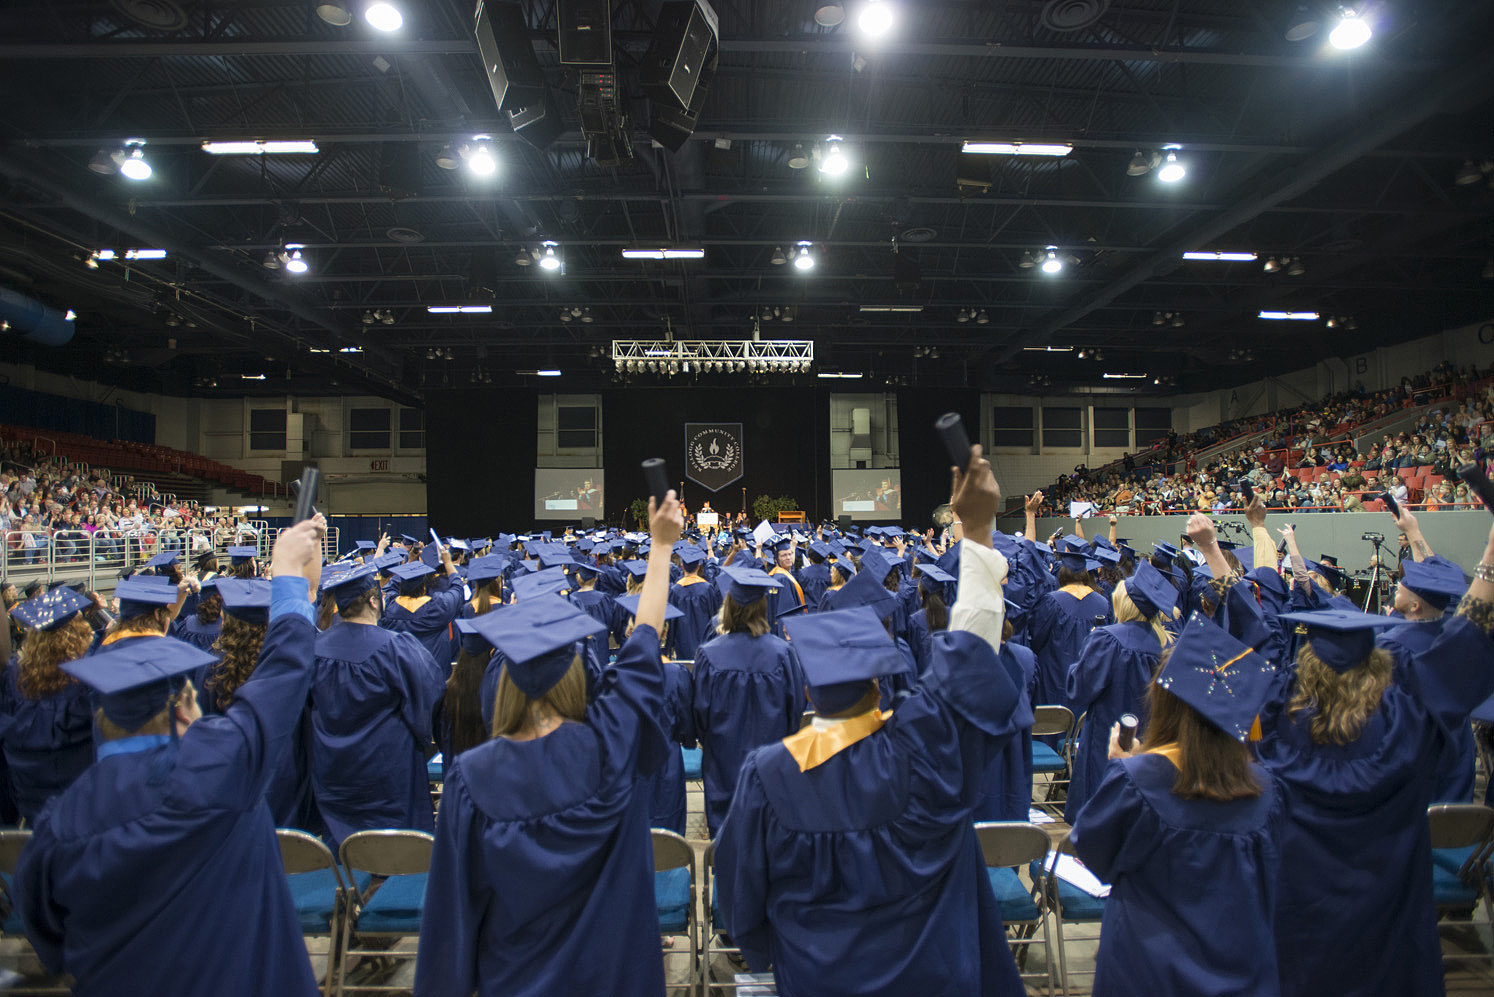 Graduates raise their hands in celebration following commencement.